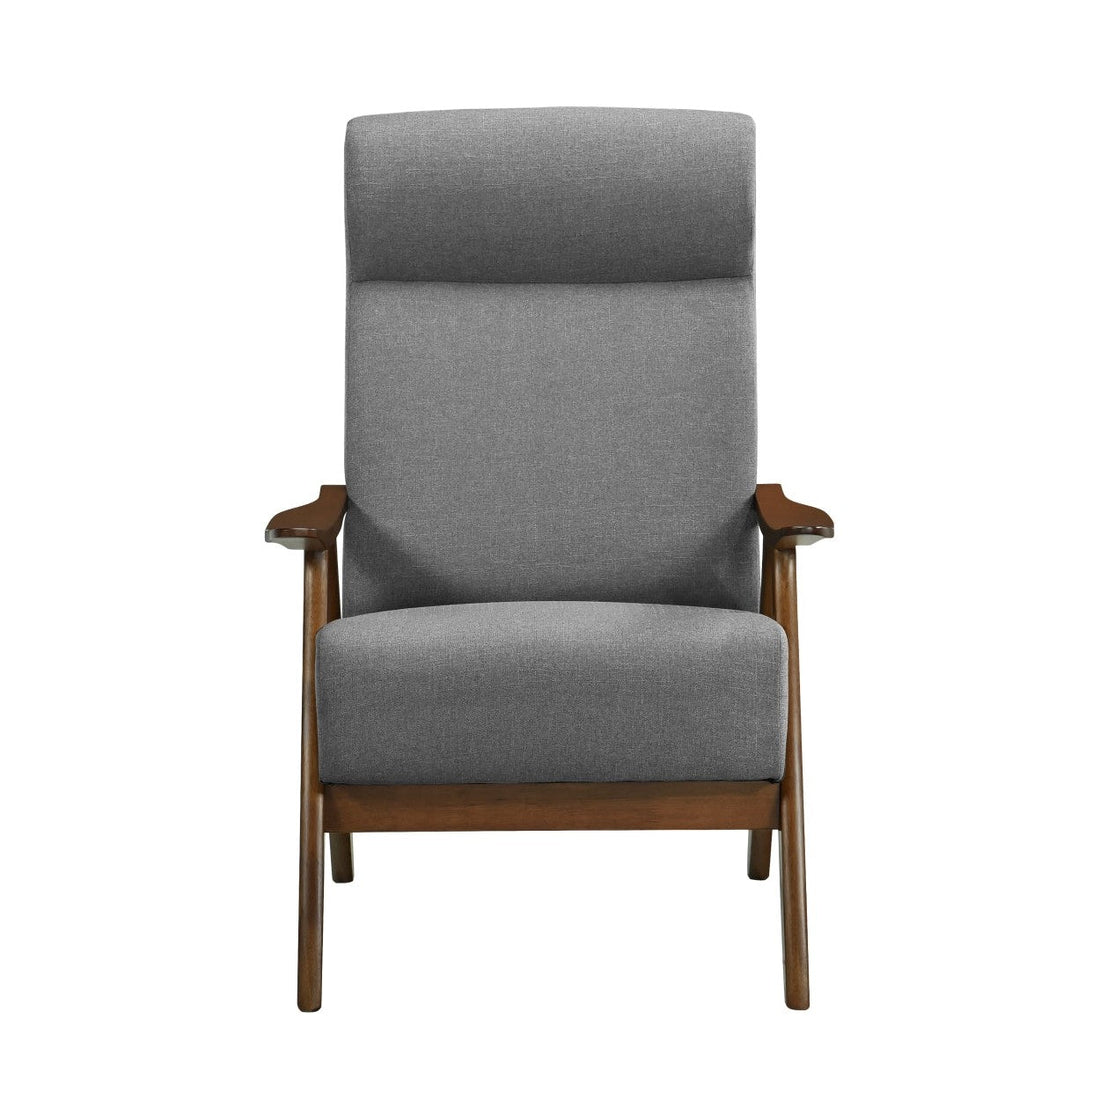 ACCENT CHAIR, GRAY TEXTURED FABRIC 1077GY-1